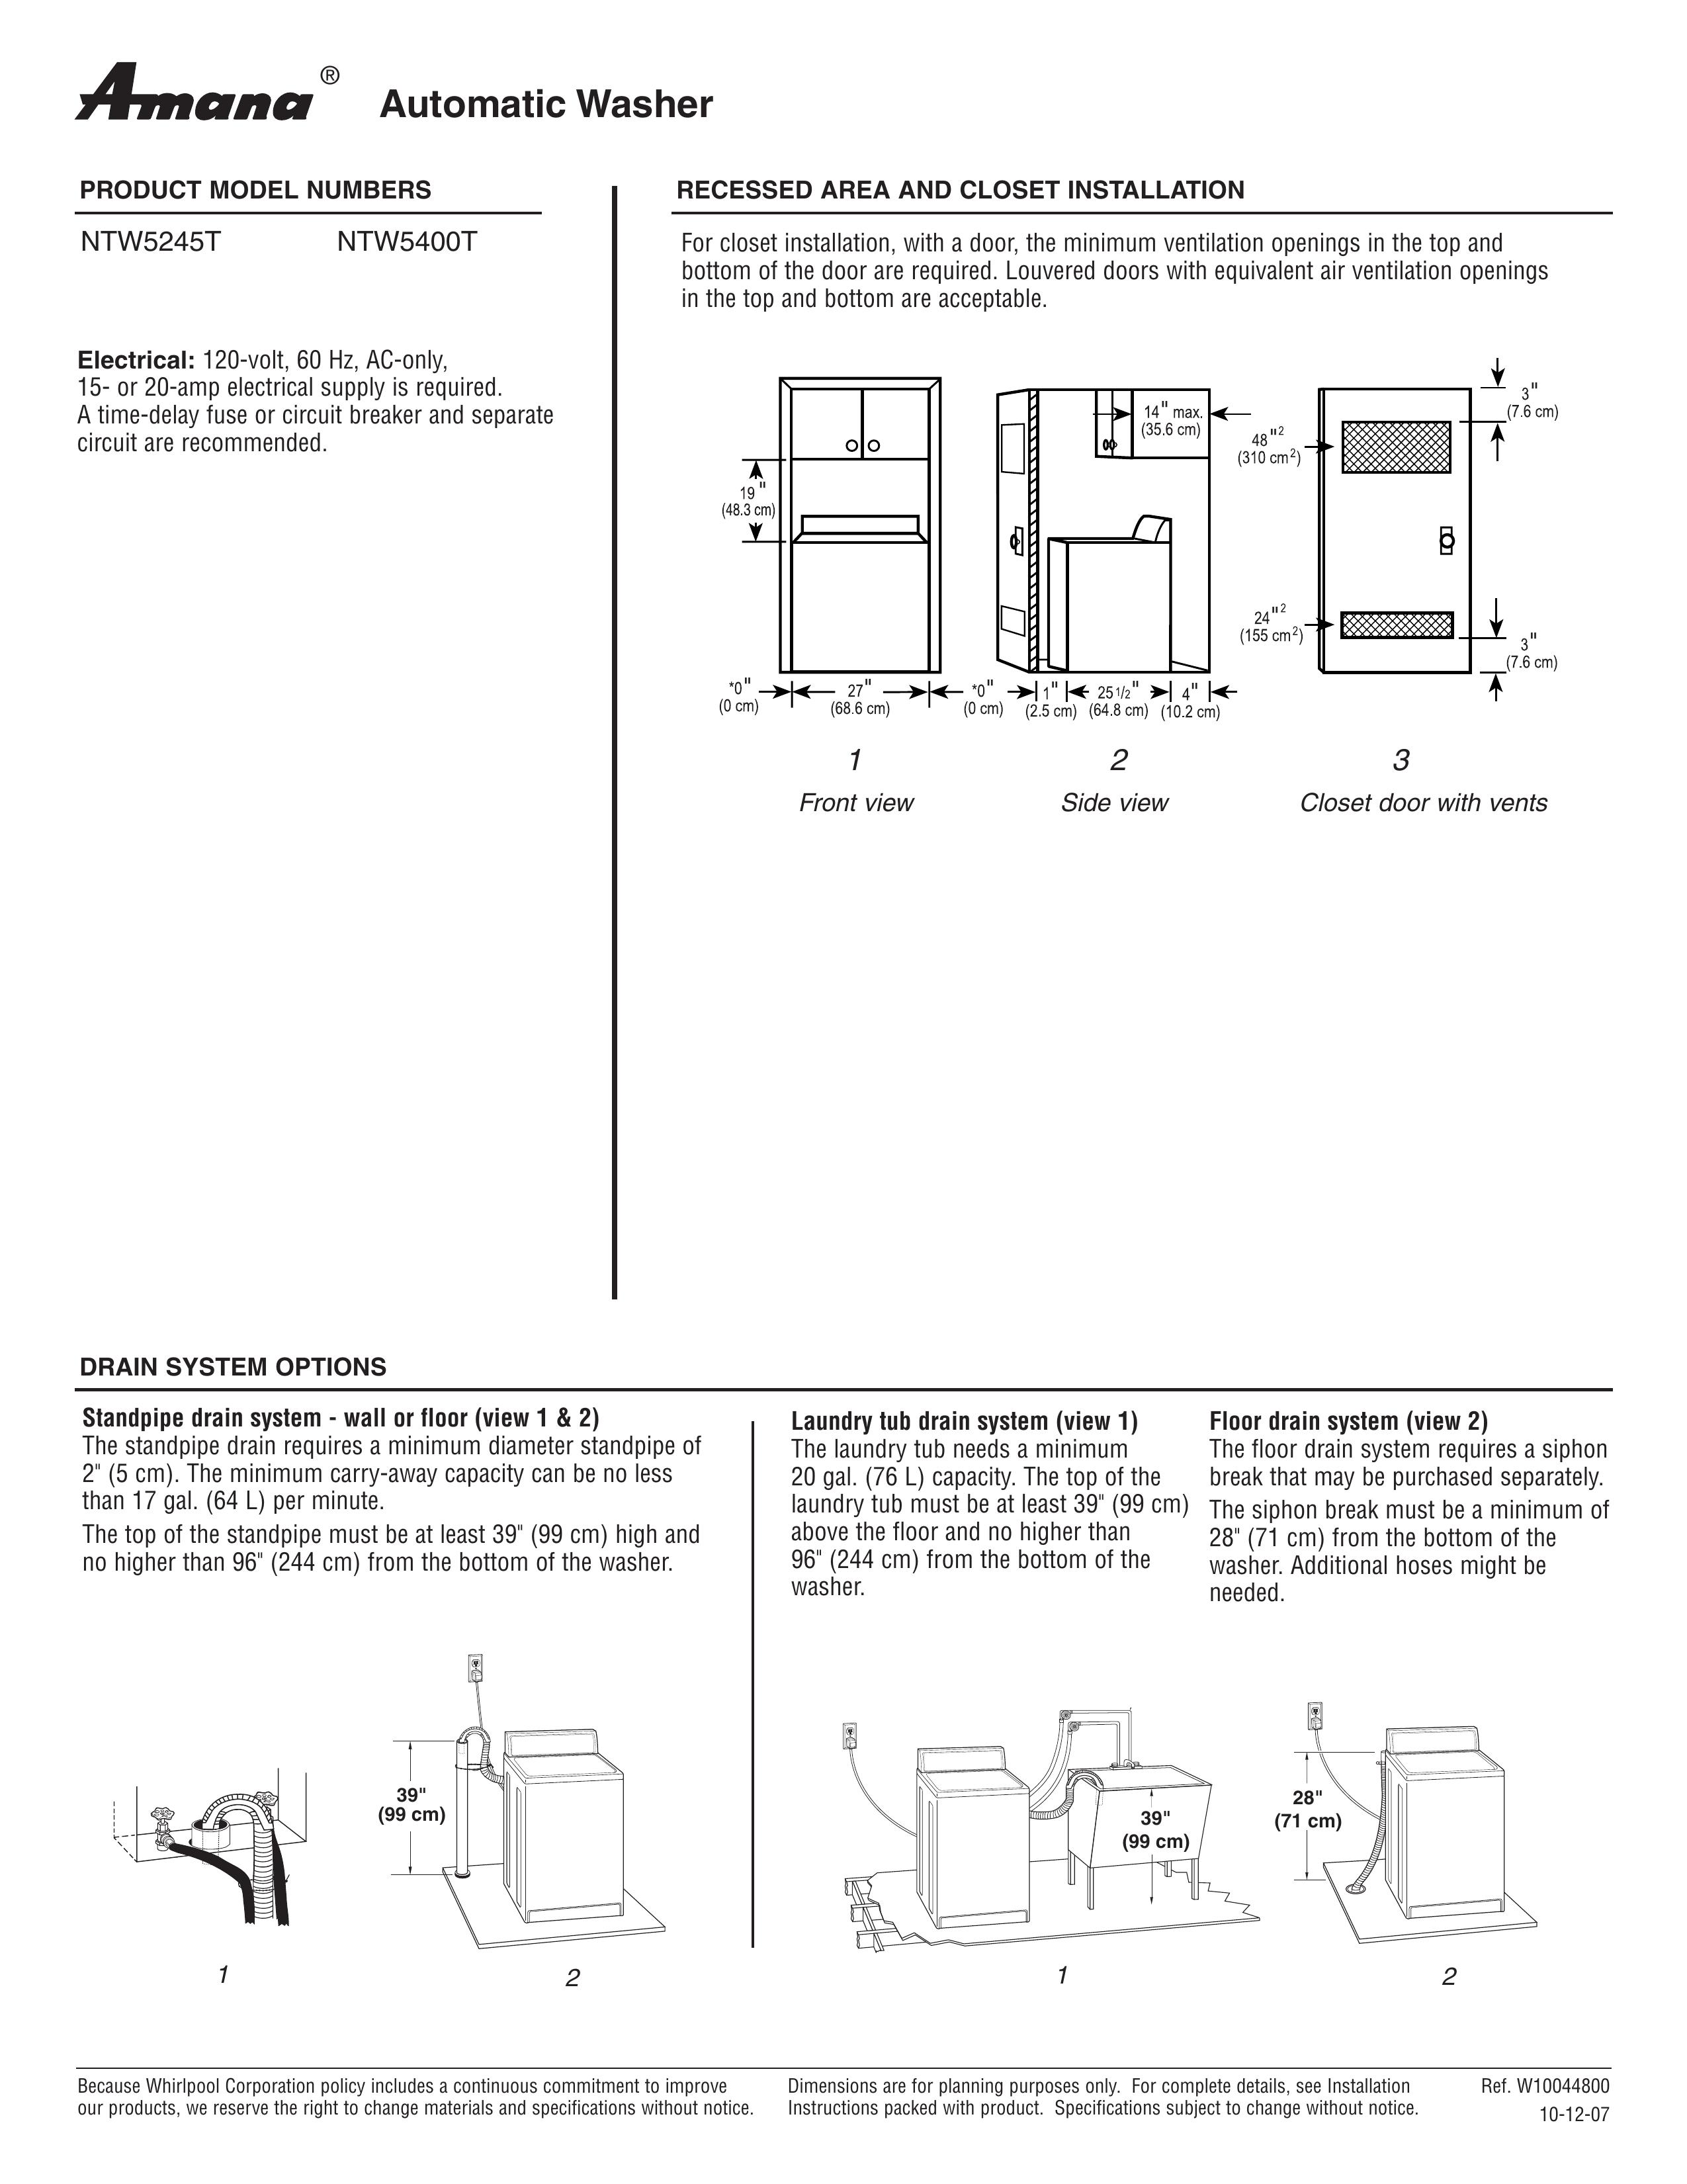 Amana NTW5245T Washer/Dryer User Manual